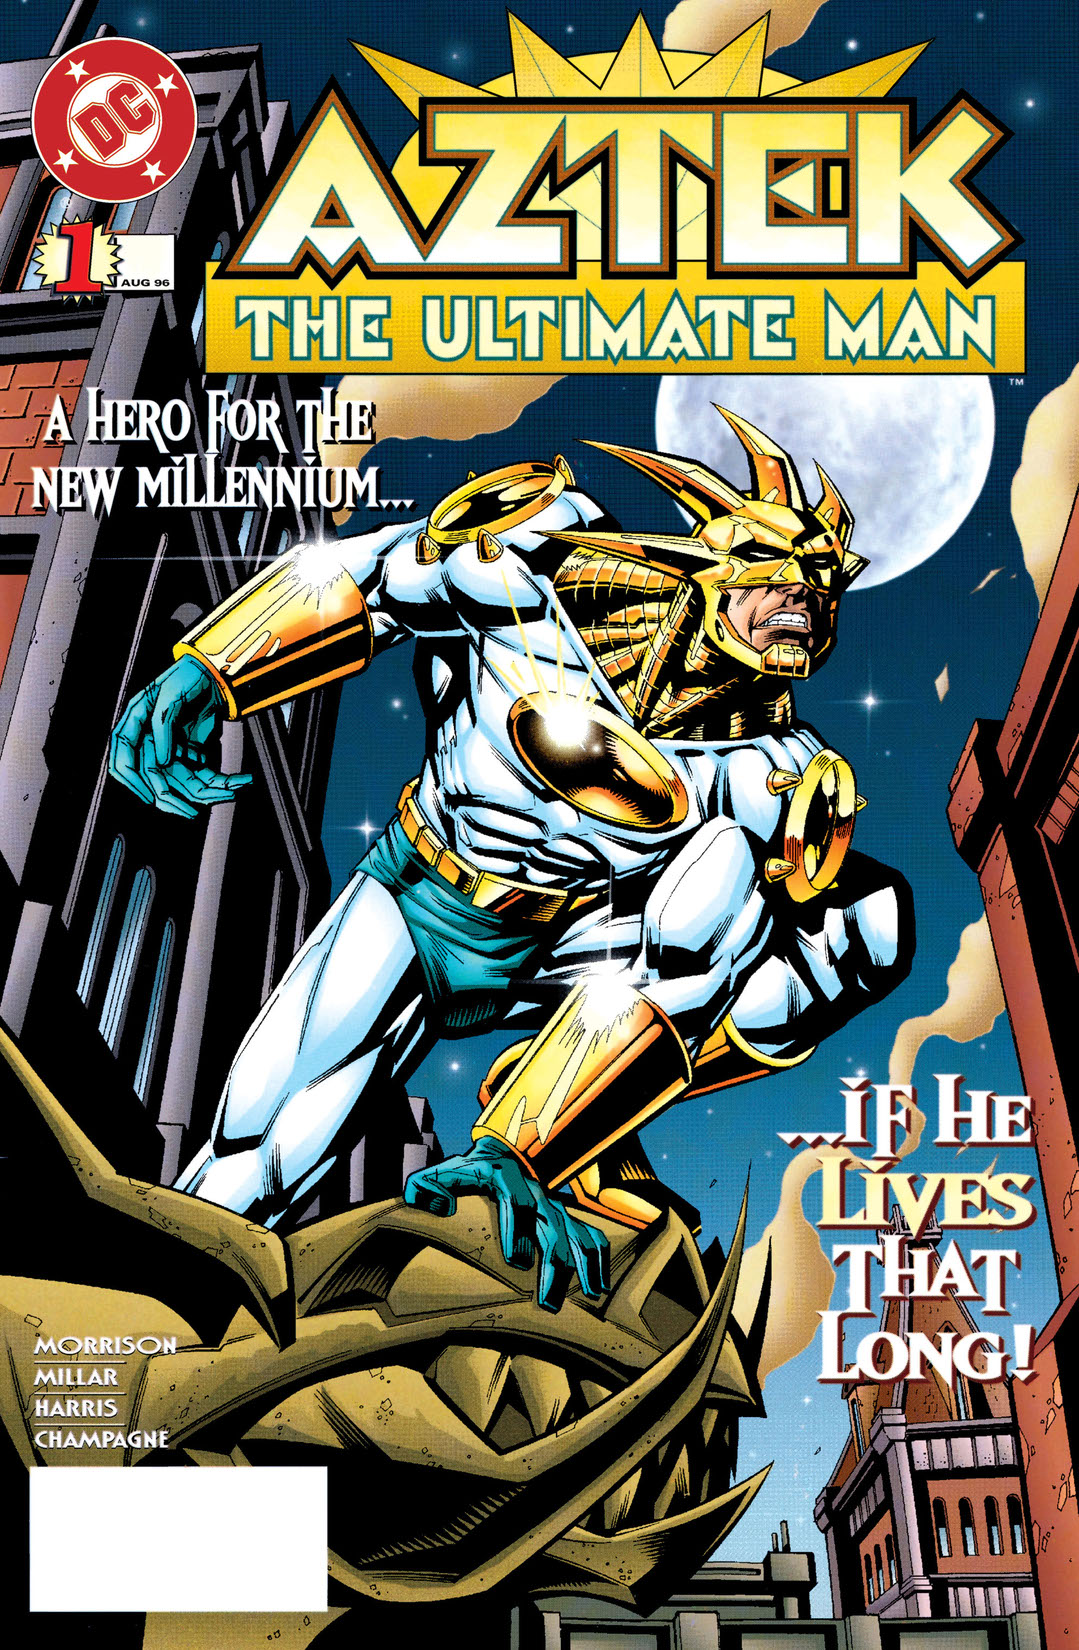 Aztek: The Ultimate Man #1 preview images